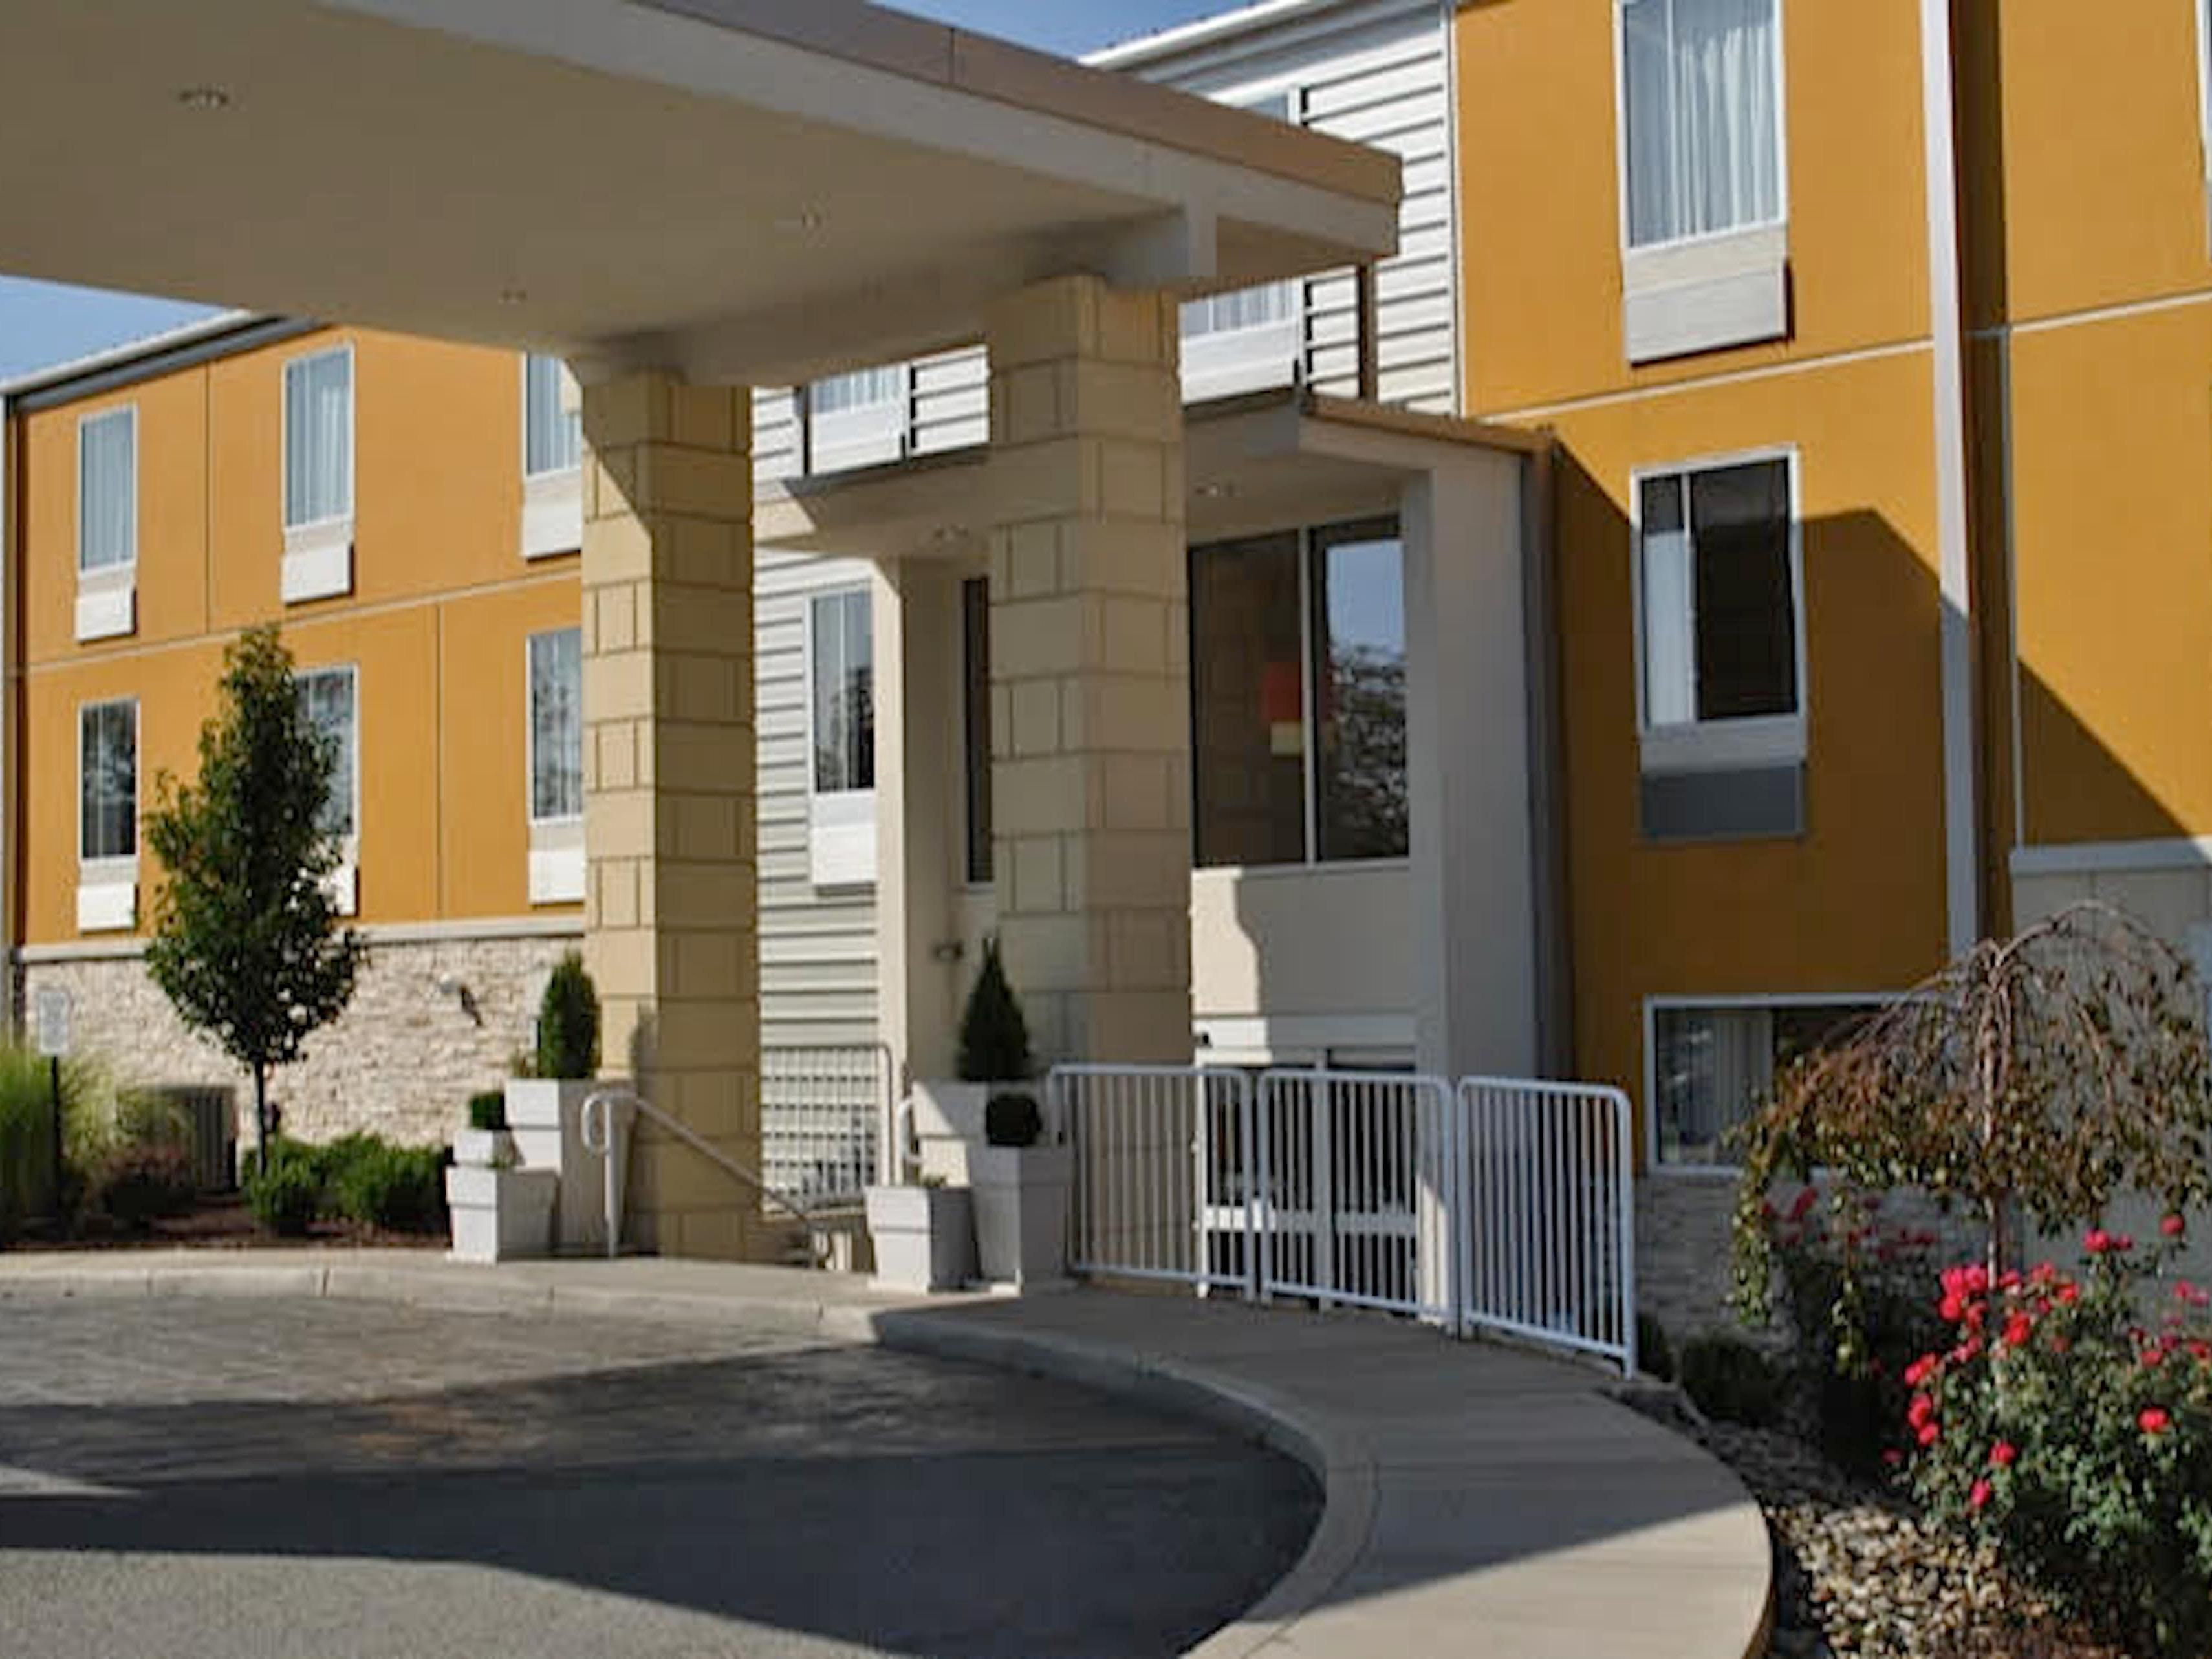 Carnegie Mellon Hotels in Munhall, PA | Holiday Inn Express Pittsburgh